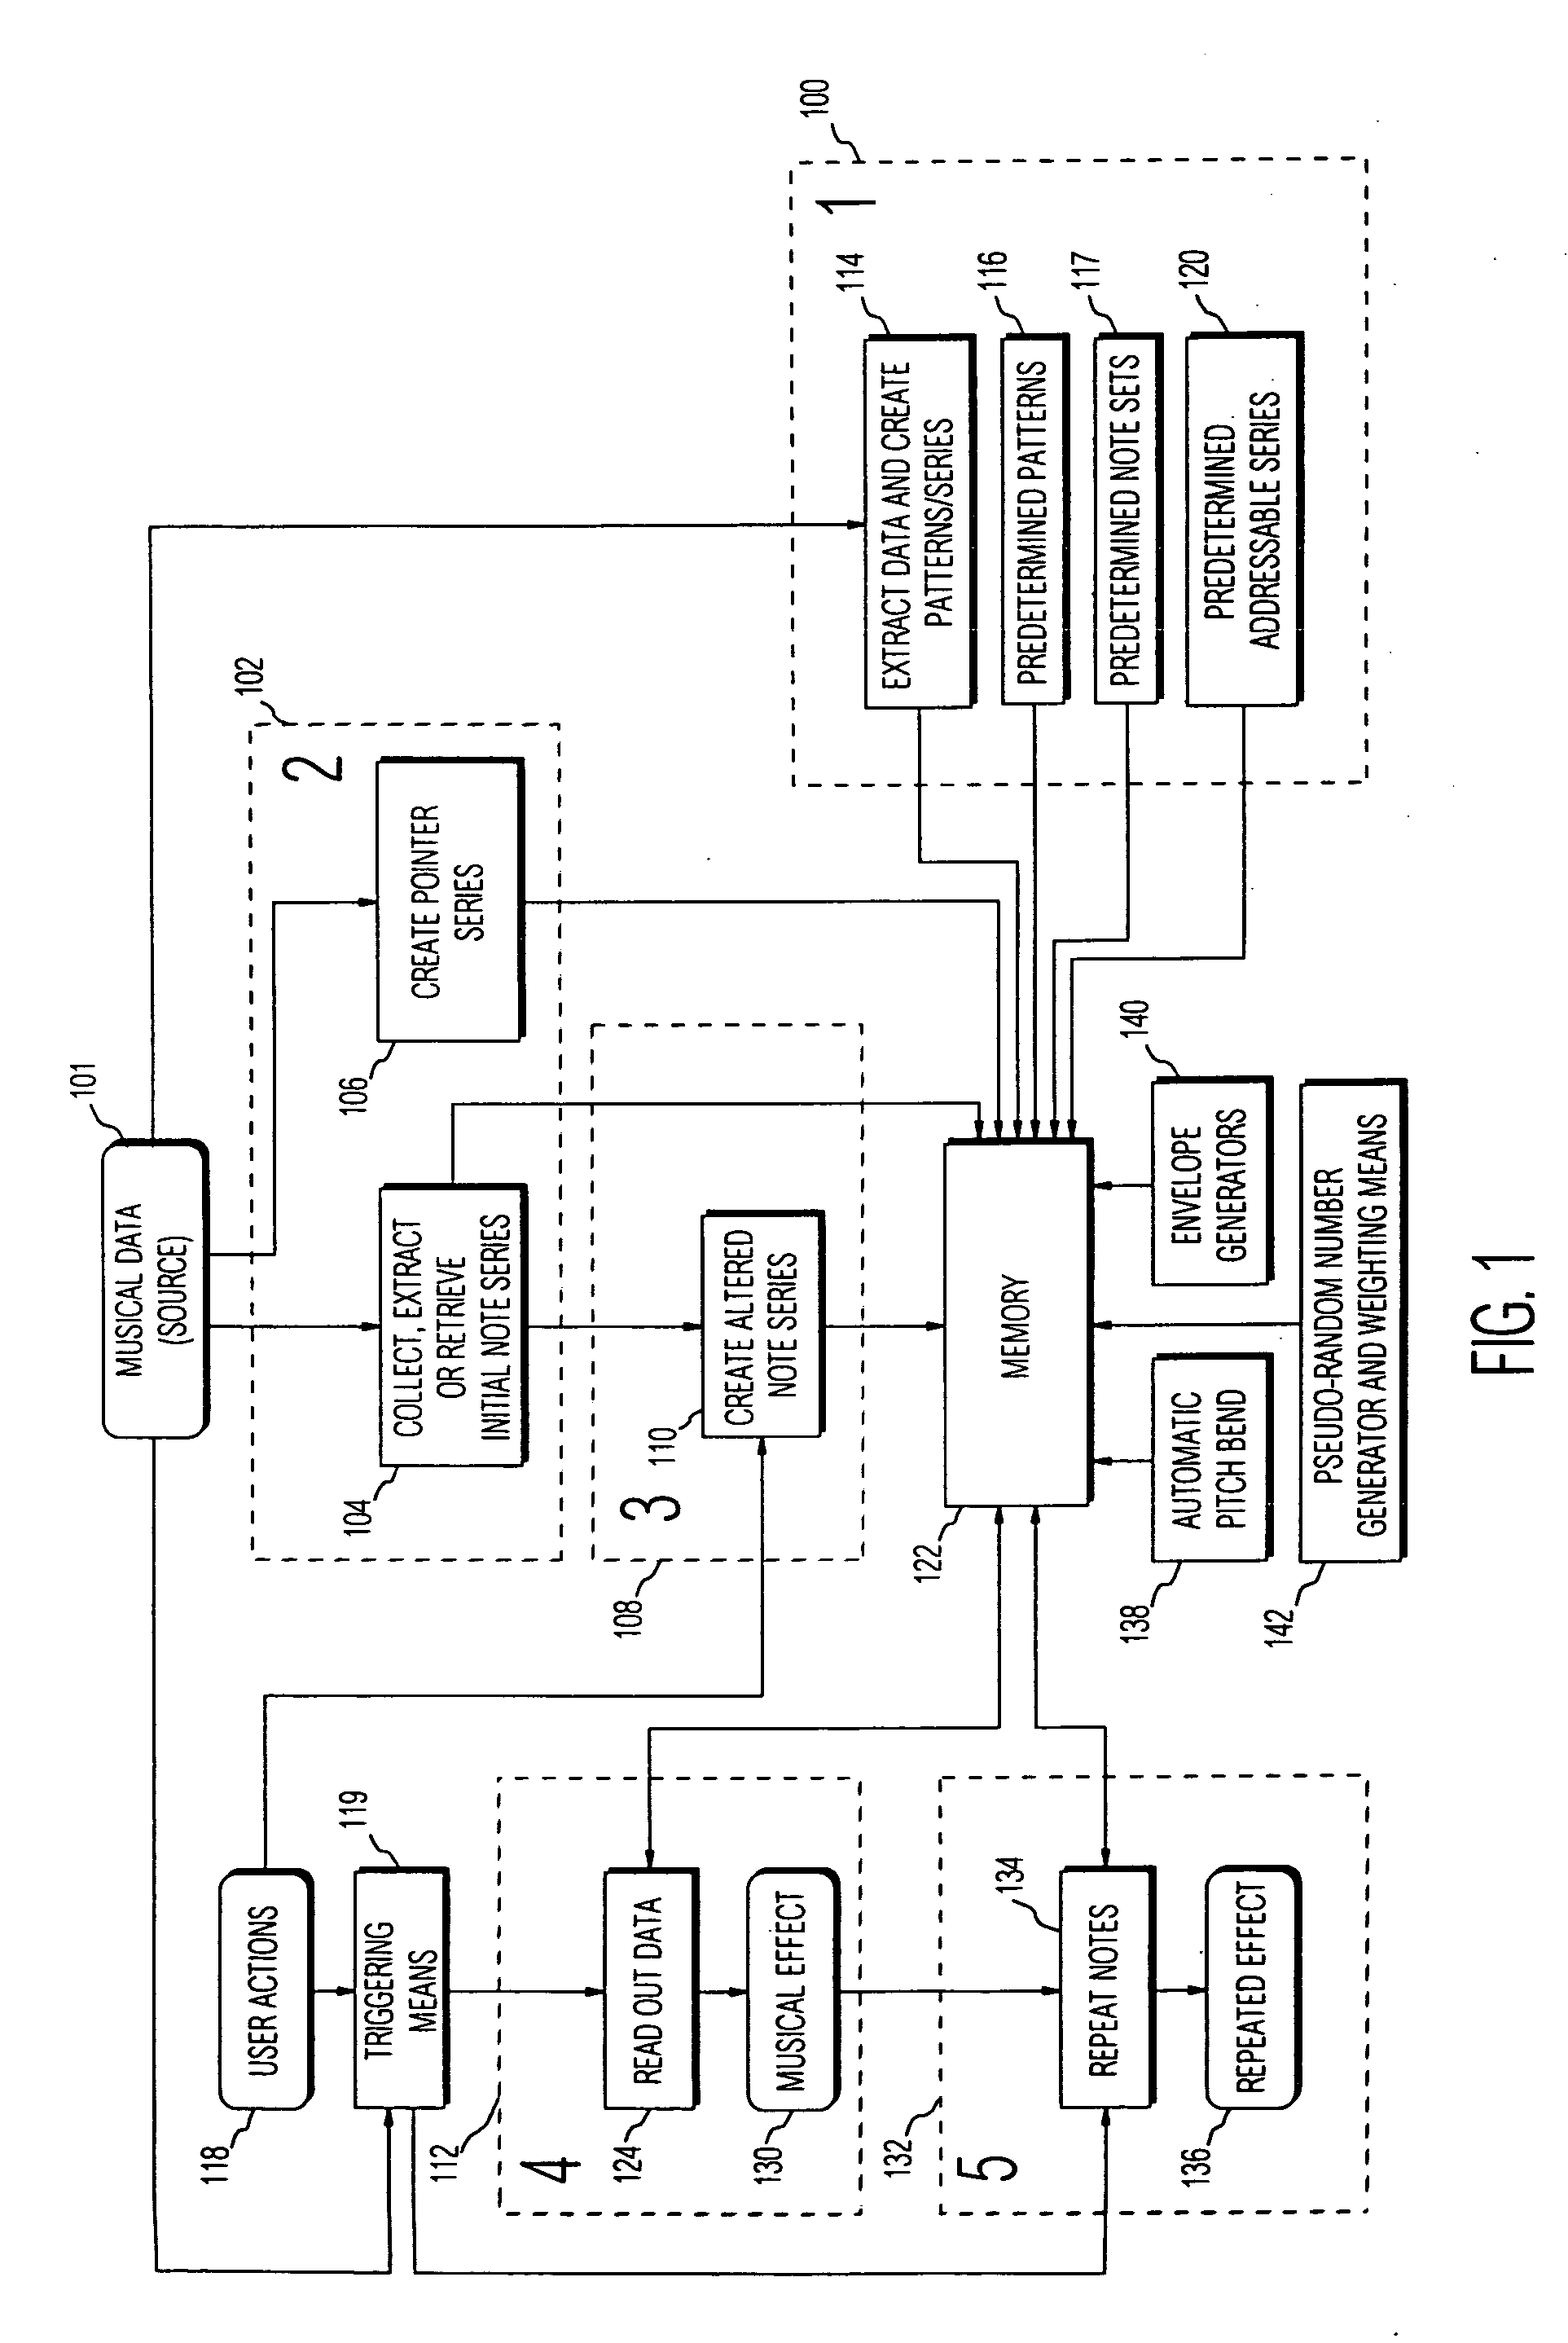 Method and apparatus for randomized variation of musical data